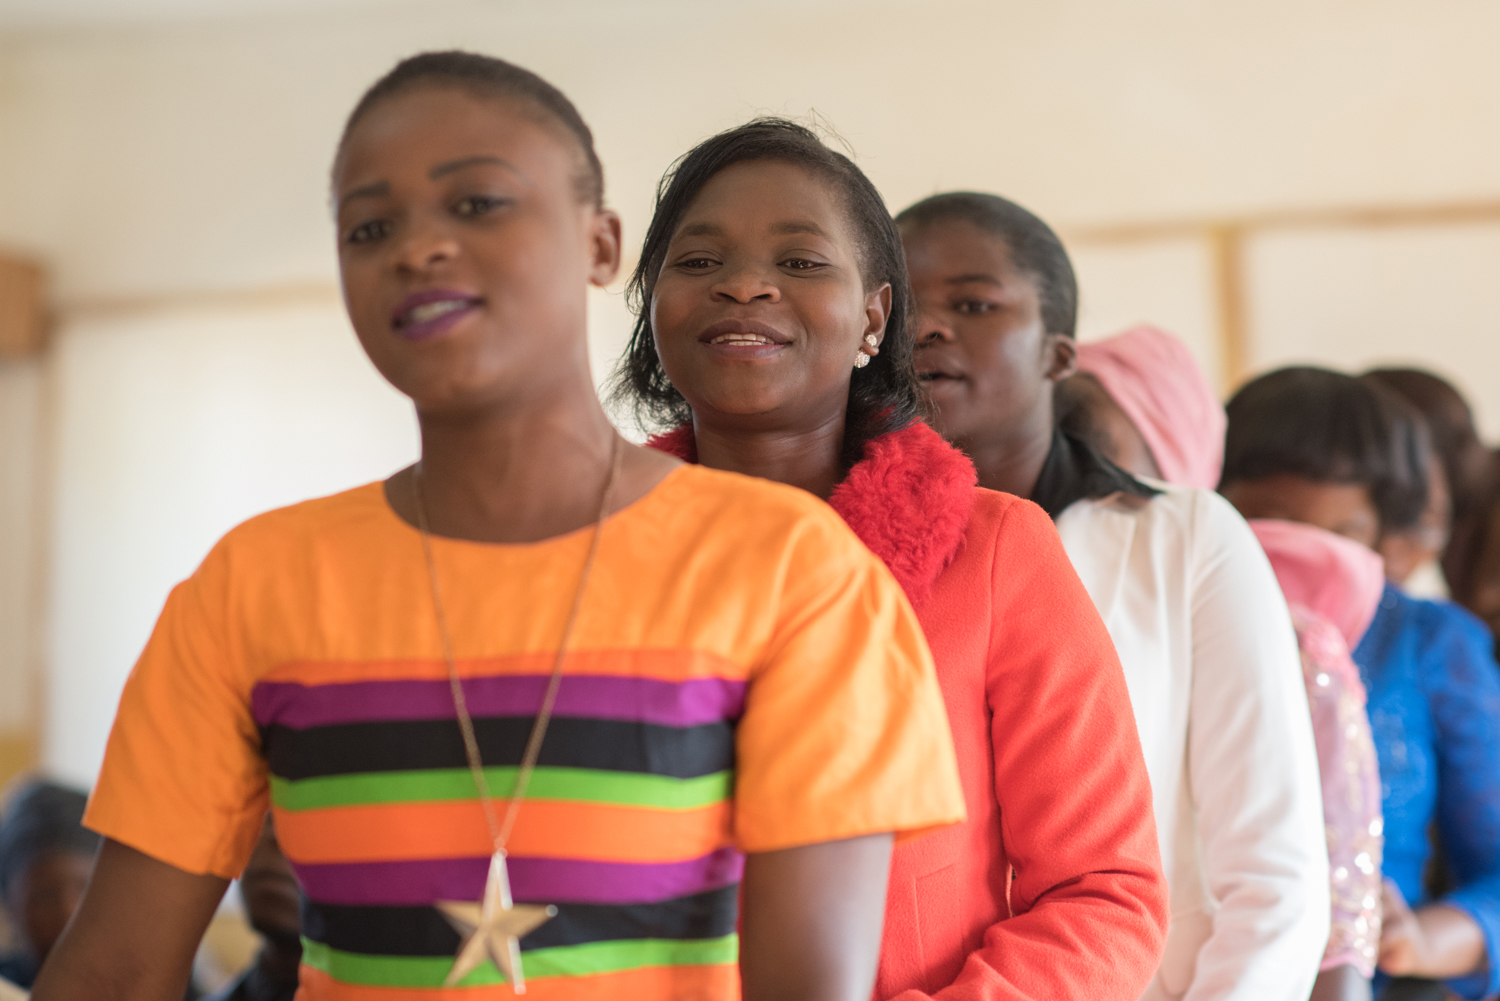 A Justo Mwale women’s choir sings a chorus in chapel, while dancing their way forward to sing the main song.